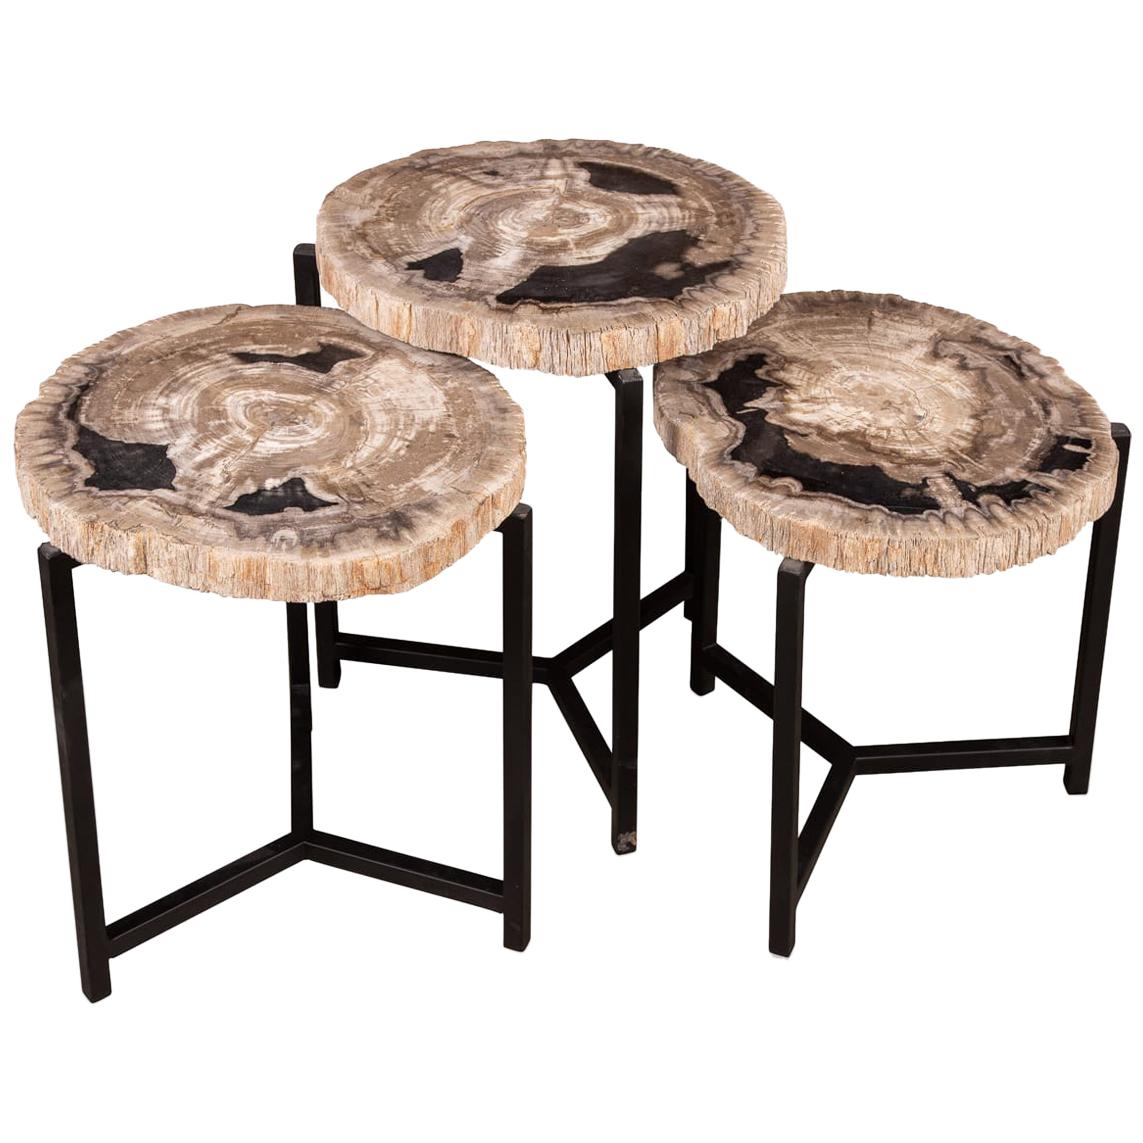 Nest of Three Petrified Wood 'Fossil' Tables on Black Metal Bases